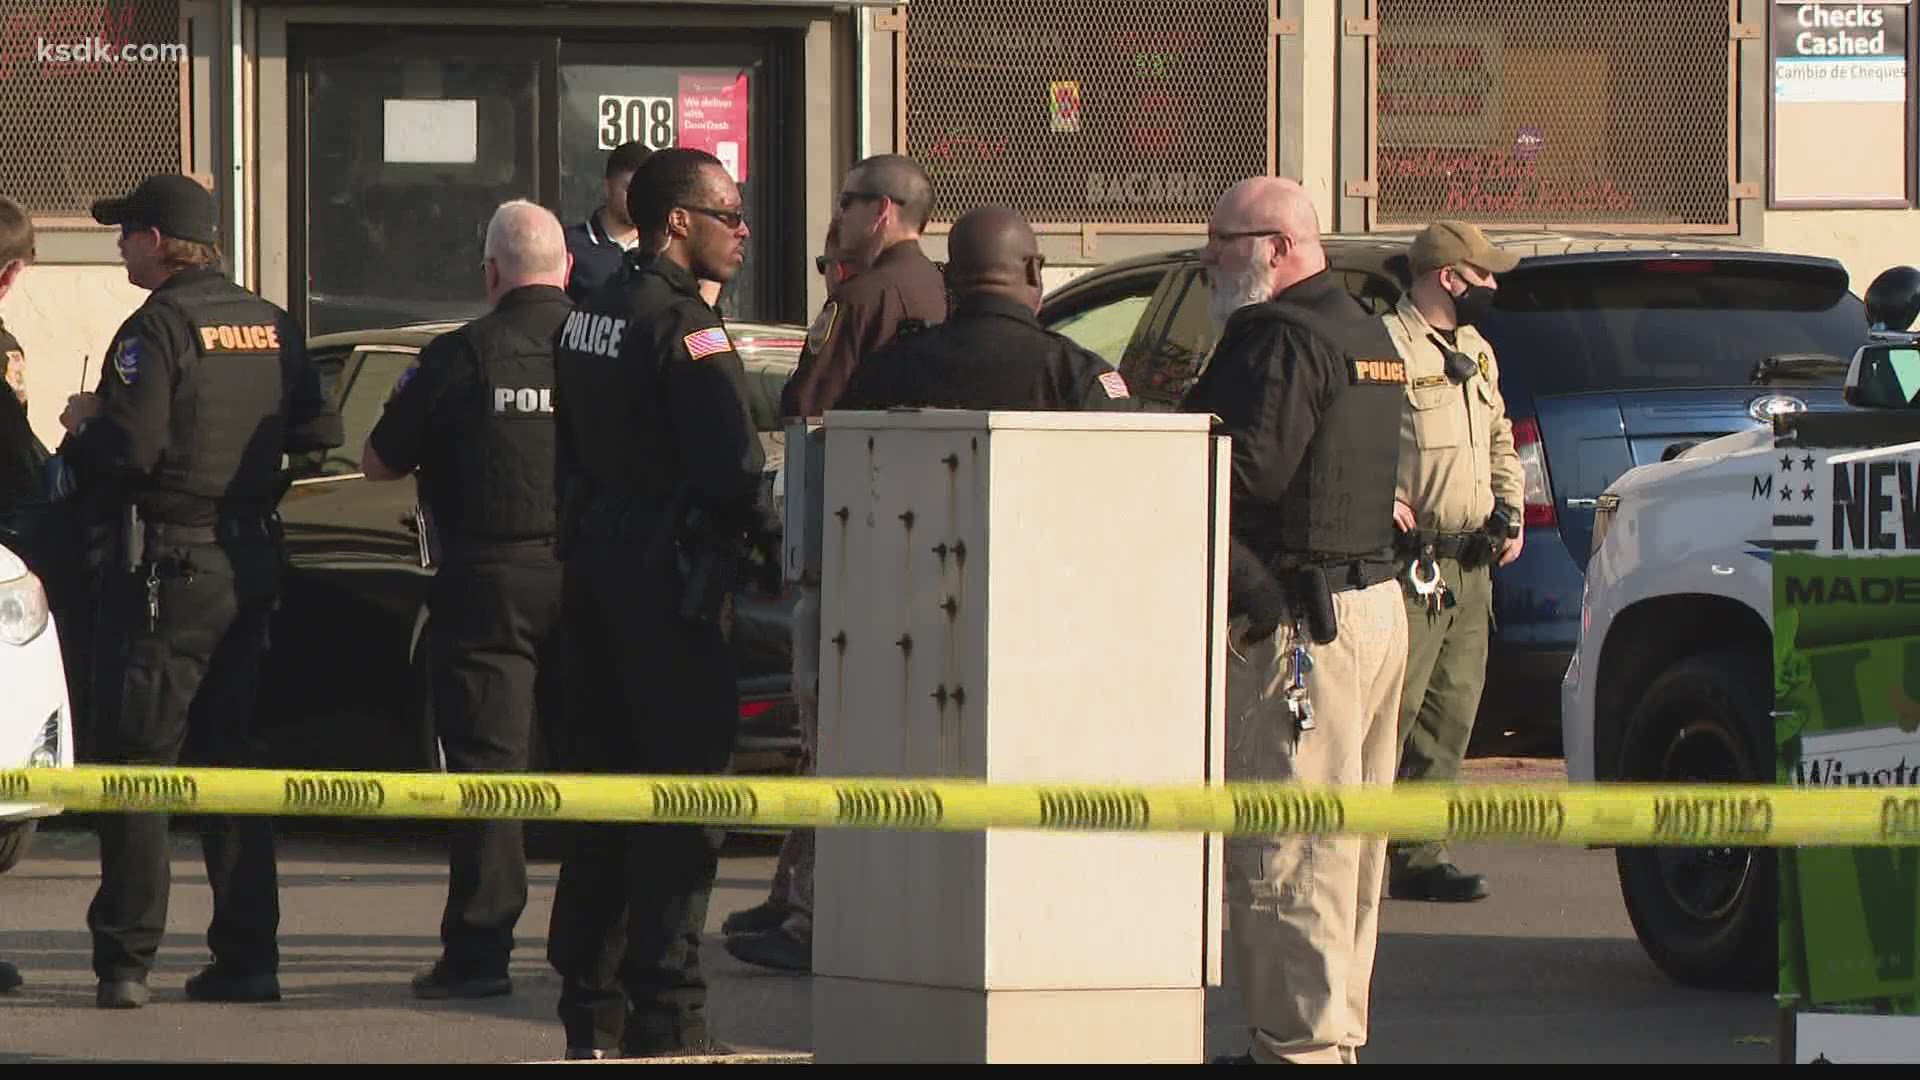 When officers arrived, they found a man dead from a gunshot wound inside a car on the parking lot of Madison Meat Market.